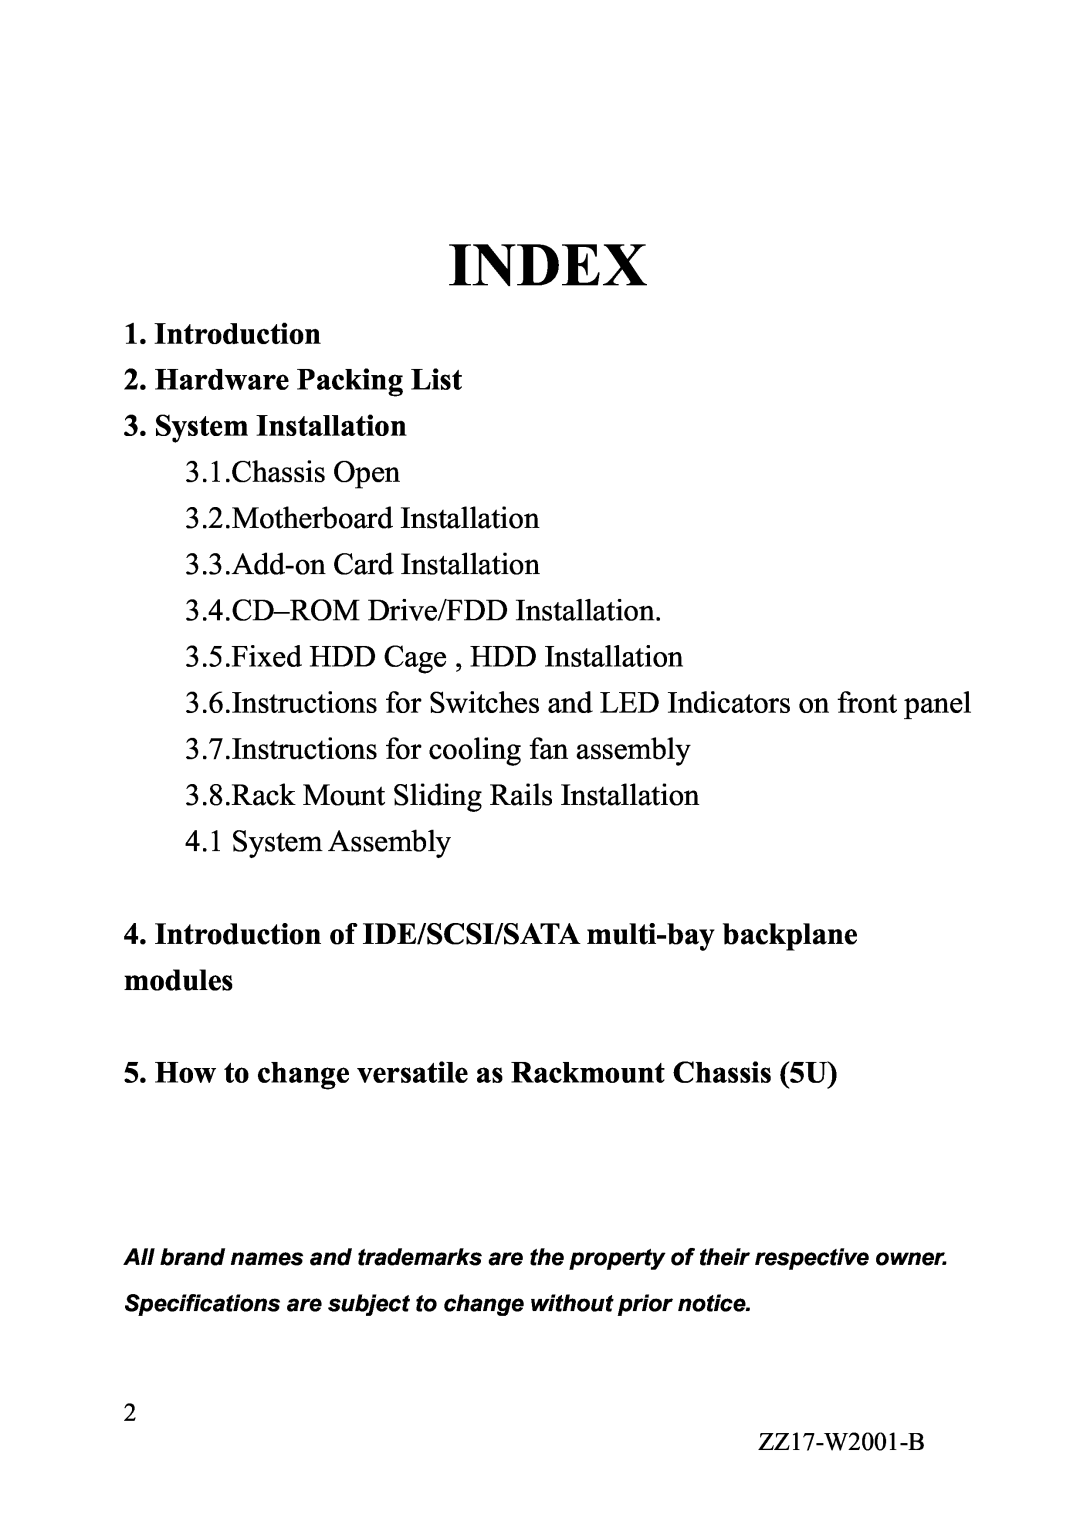 IBM YY-W2xx manual Introduction 2. Hardware Packing List, Introduction of IDE/SCSI/SATA multi-bay backplane modules, Index 